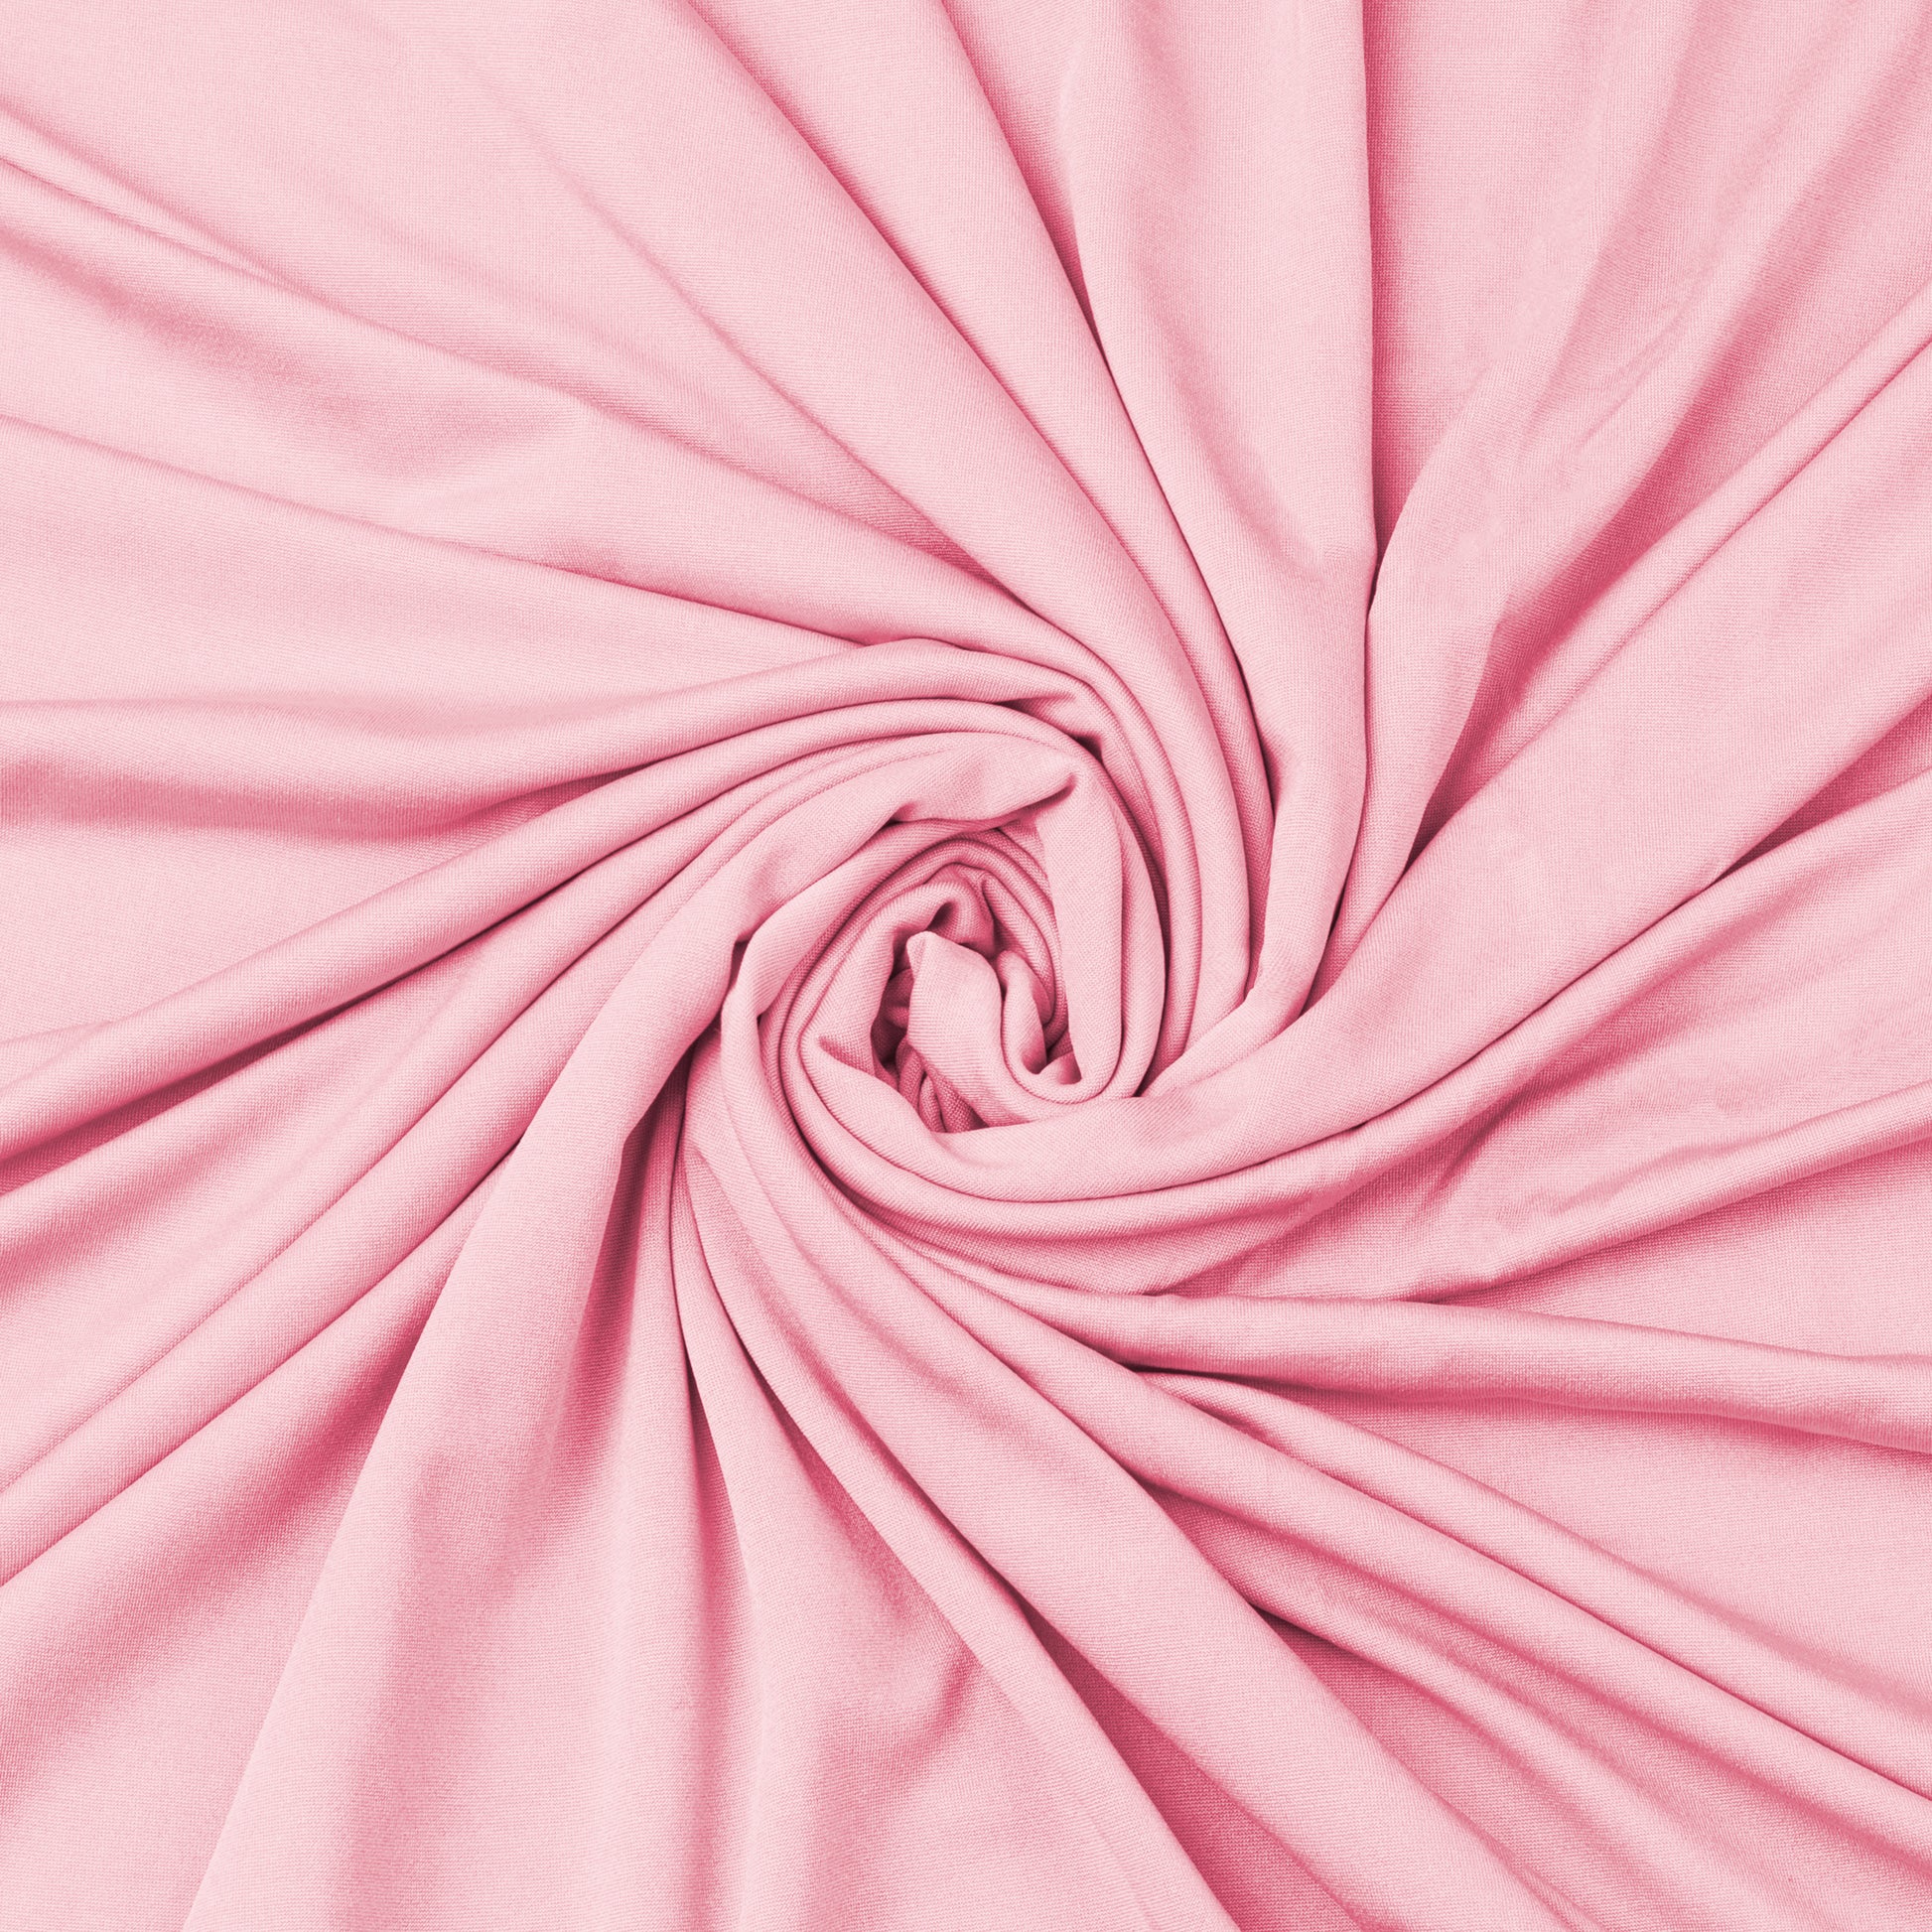 Fashion Fabrics Club Blush Red-Pink Texture Stretch Polyester Jersey Knit Fabric by The Yard (96% Polyester 4% Spandex)